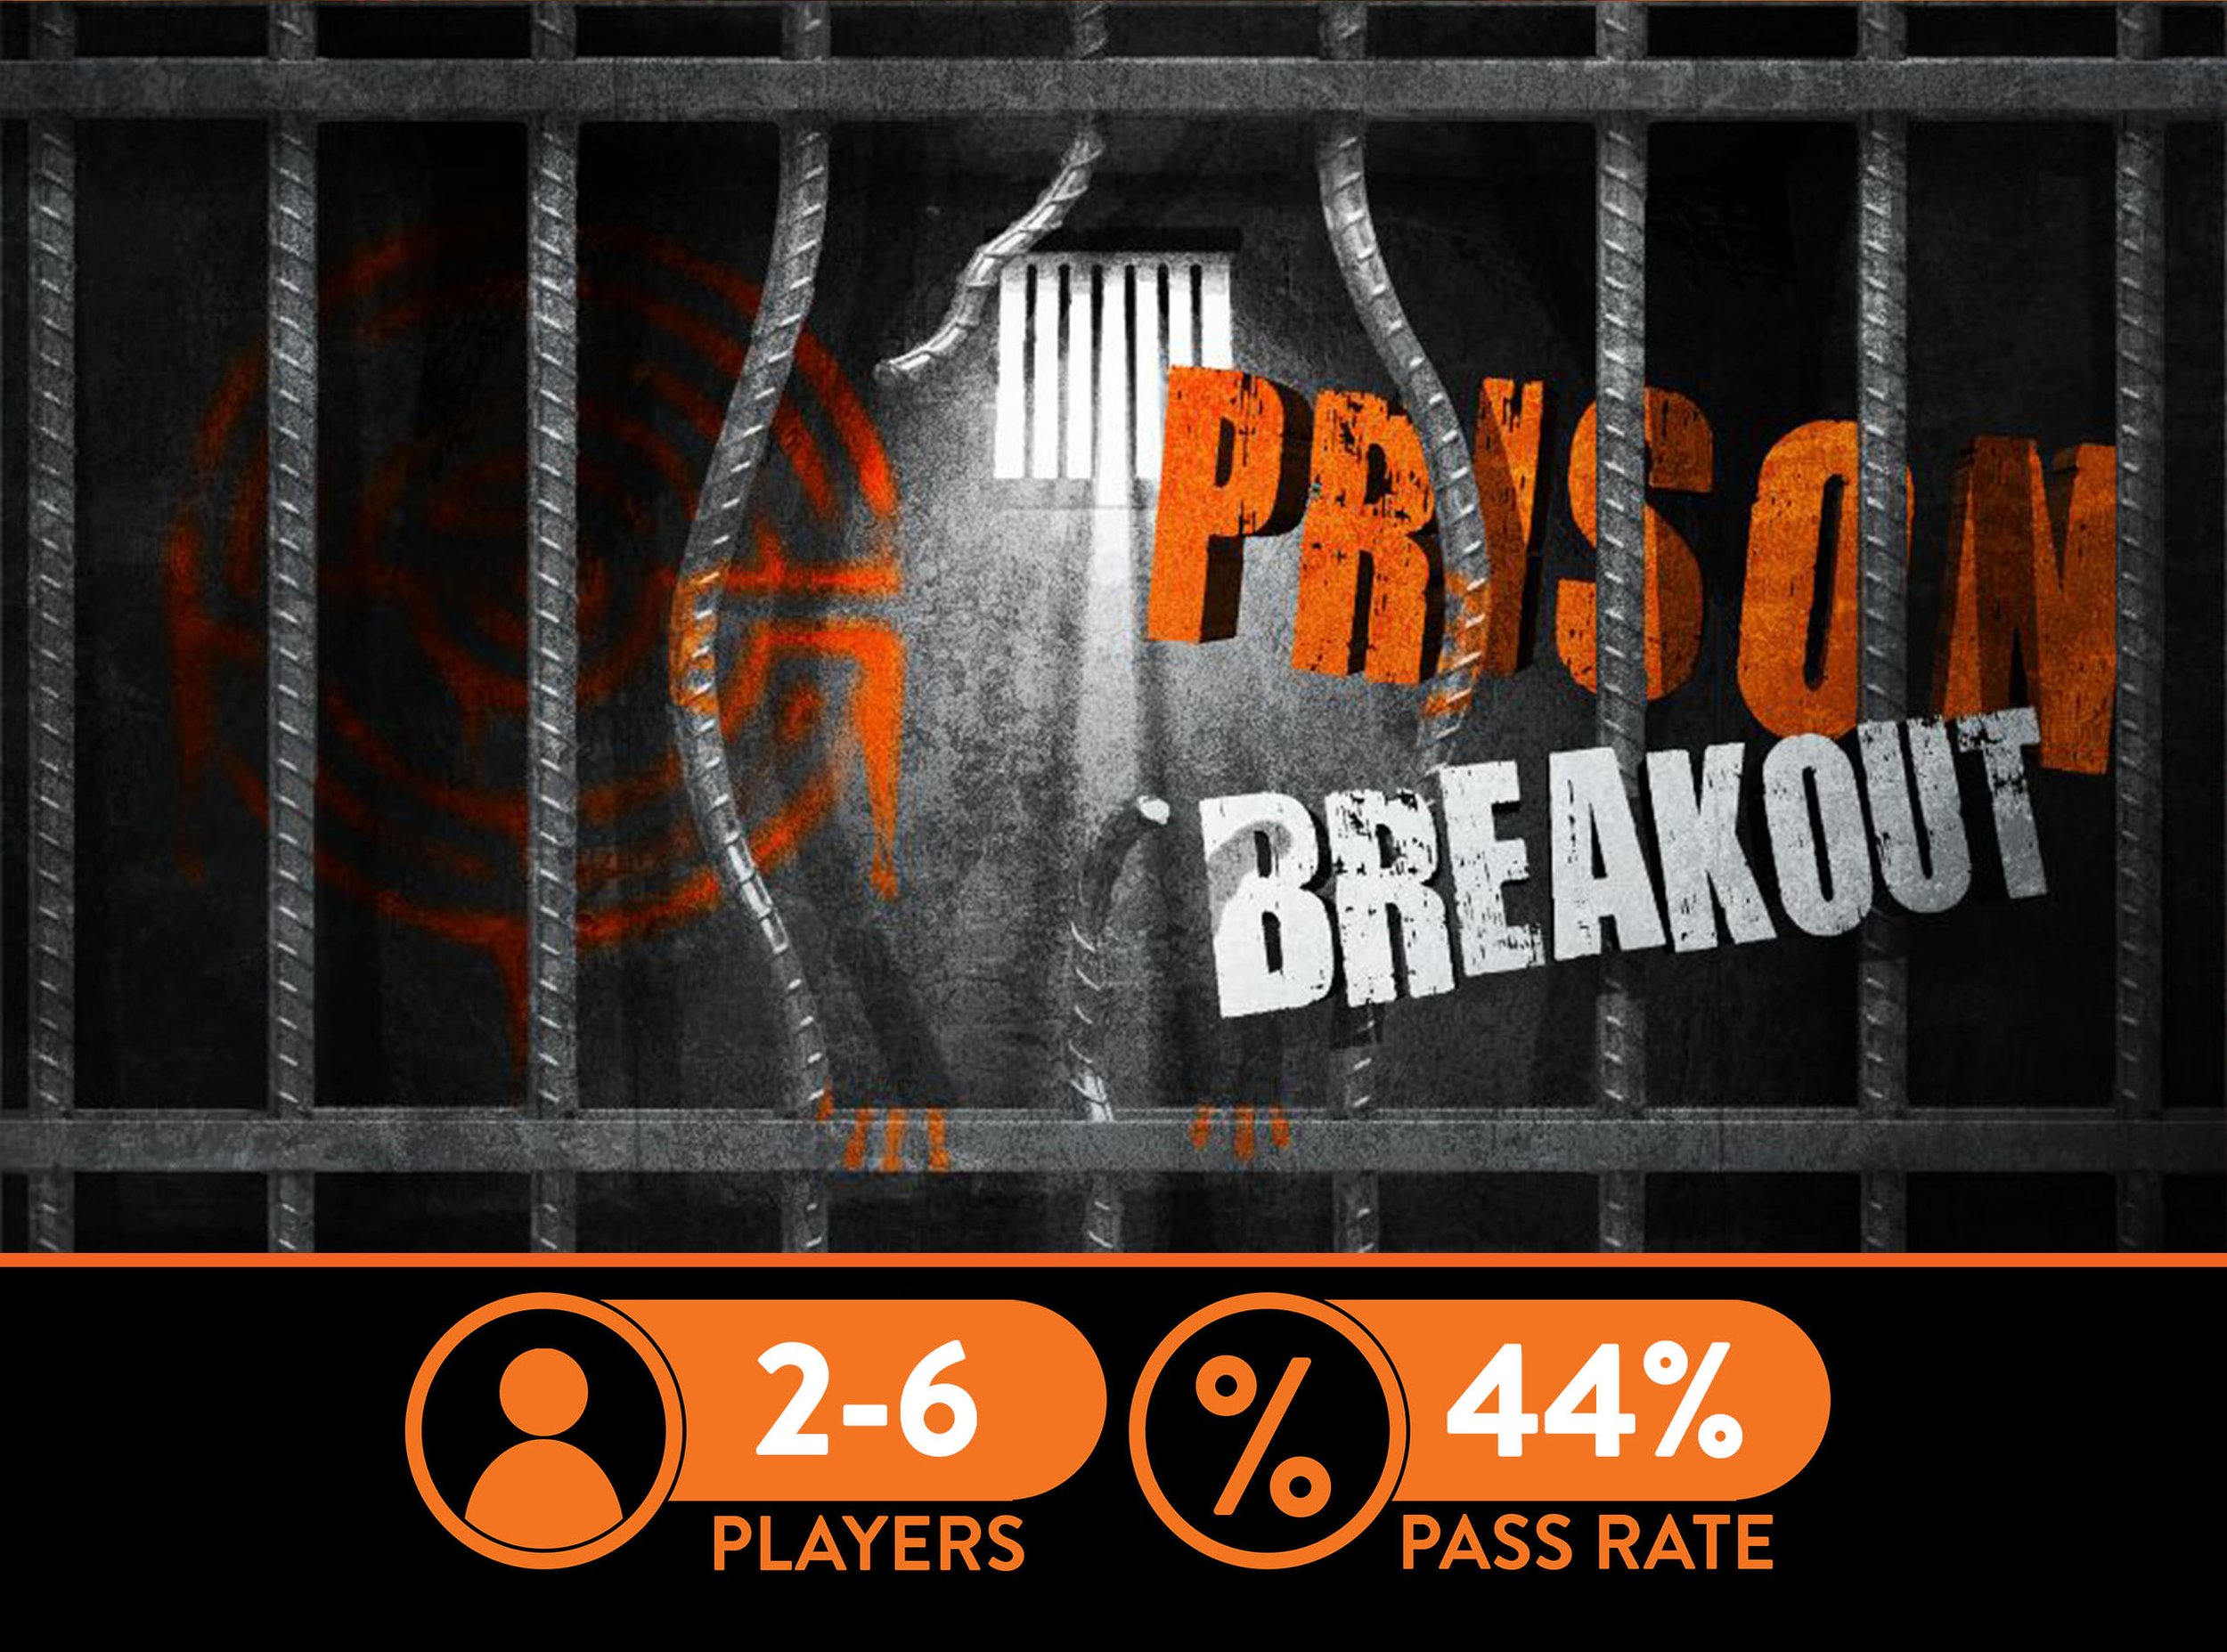 Prison Break Escape Room Game: Can You Escape Your Cell? Top-Rated